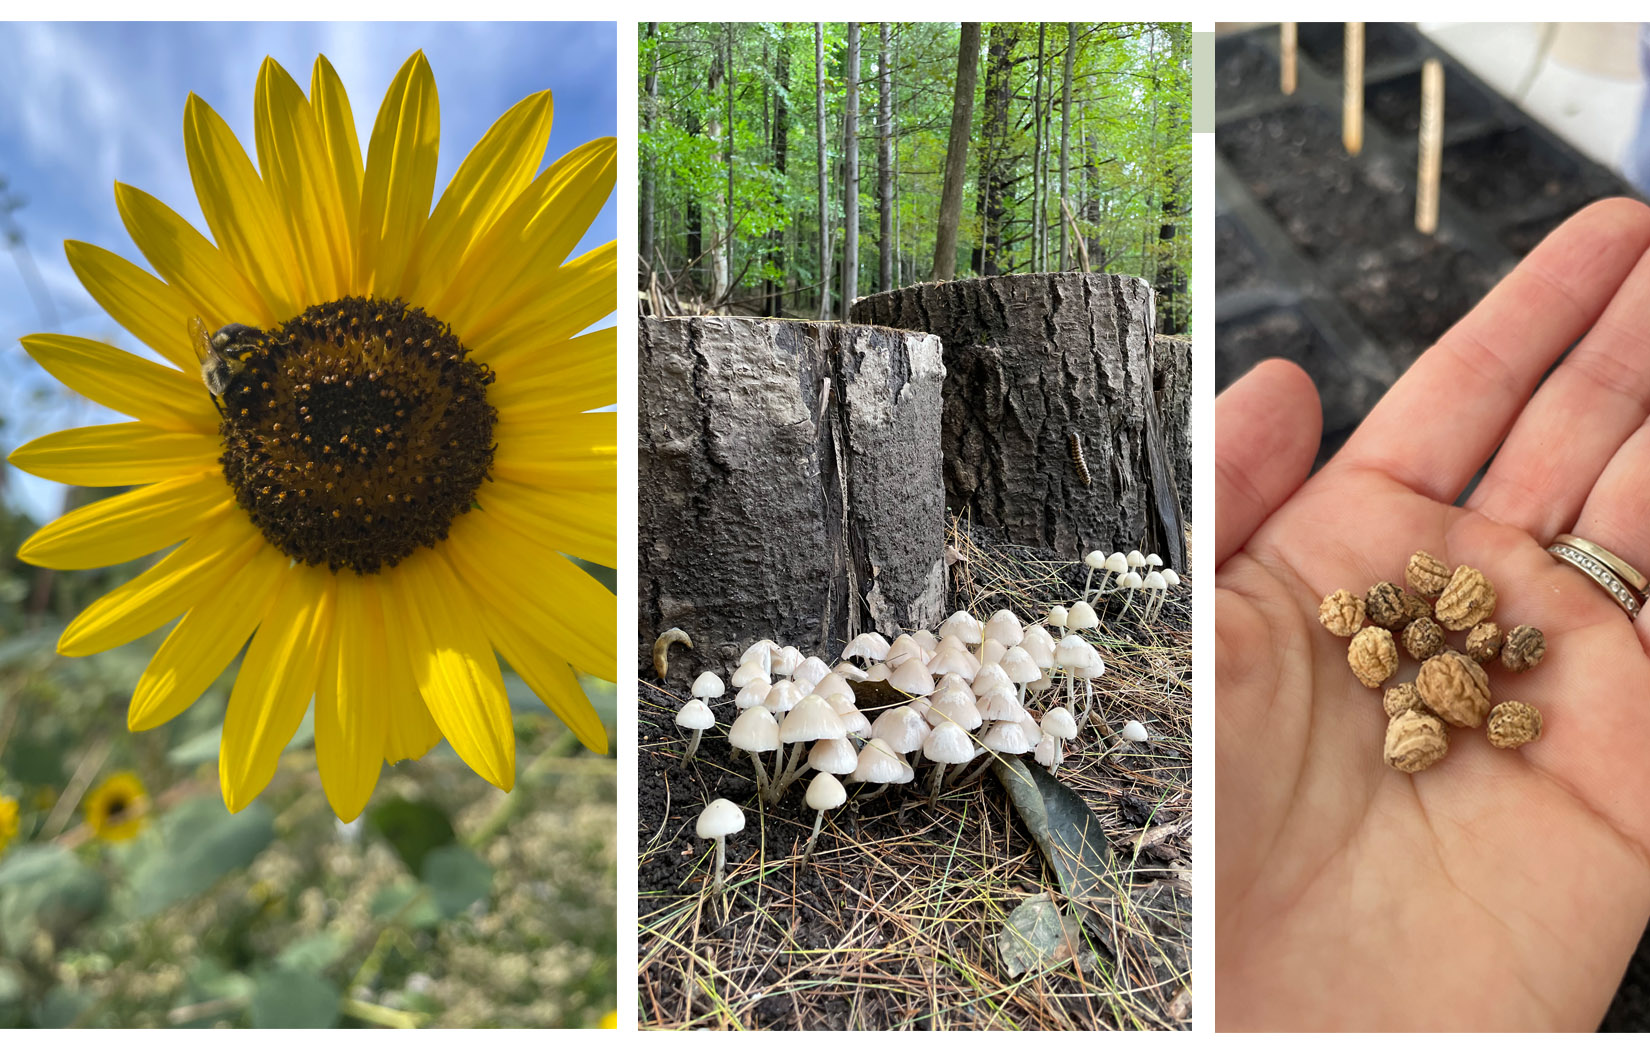 ABC's of Agriculture: sunflower, mushrooms, seeds